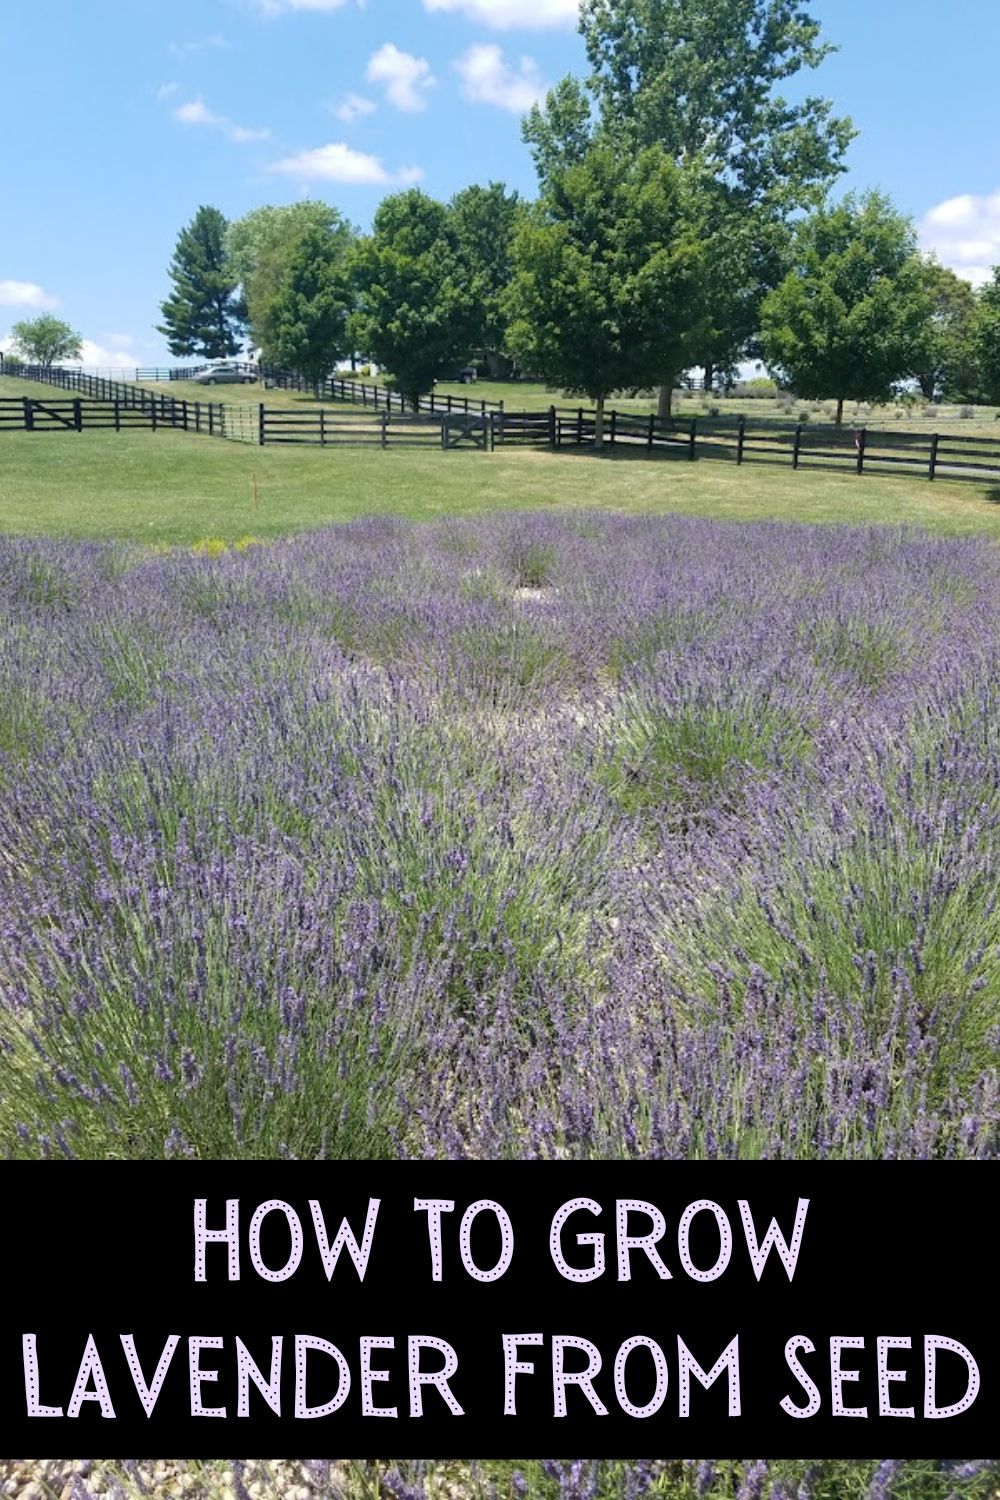 How to grow lavender from seed.